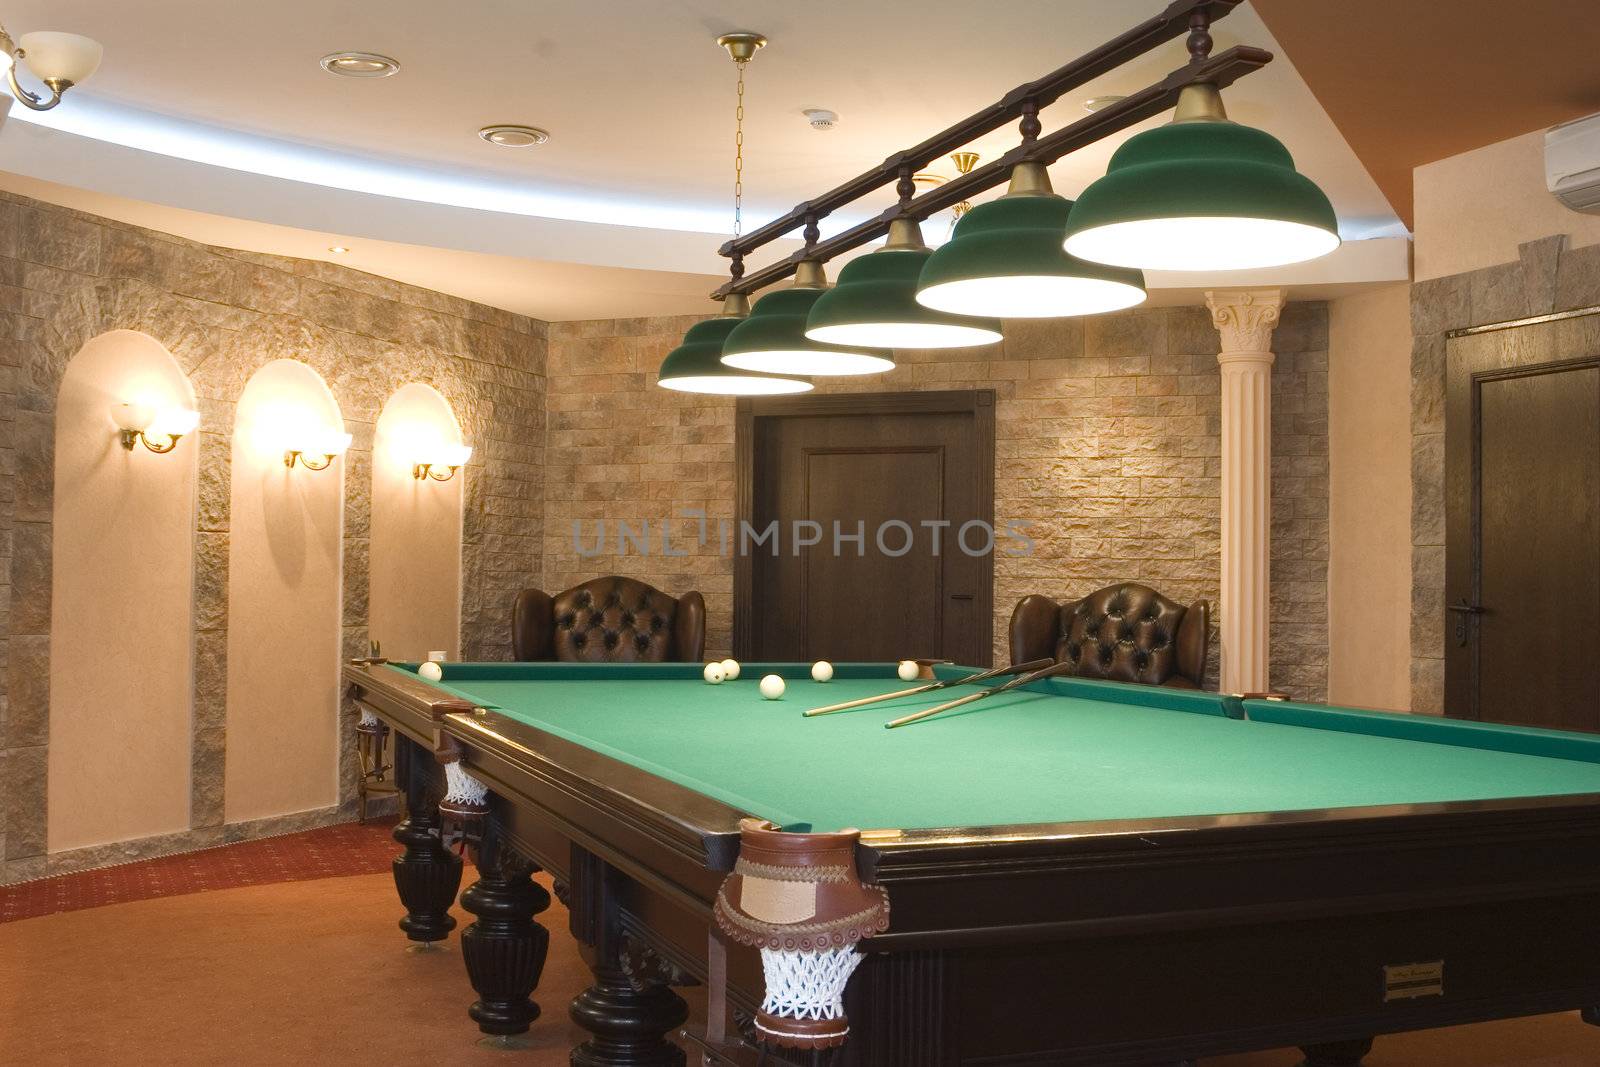 Room to play billiards